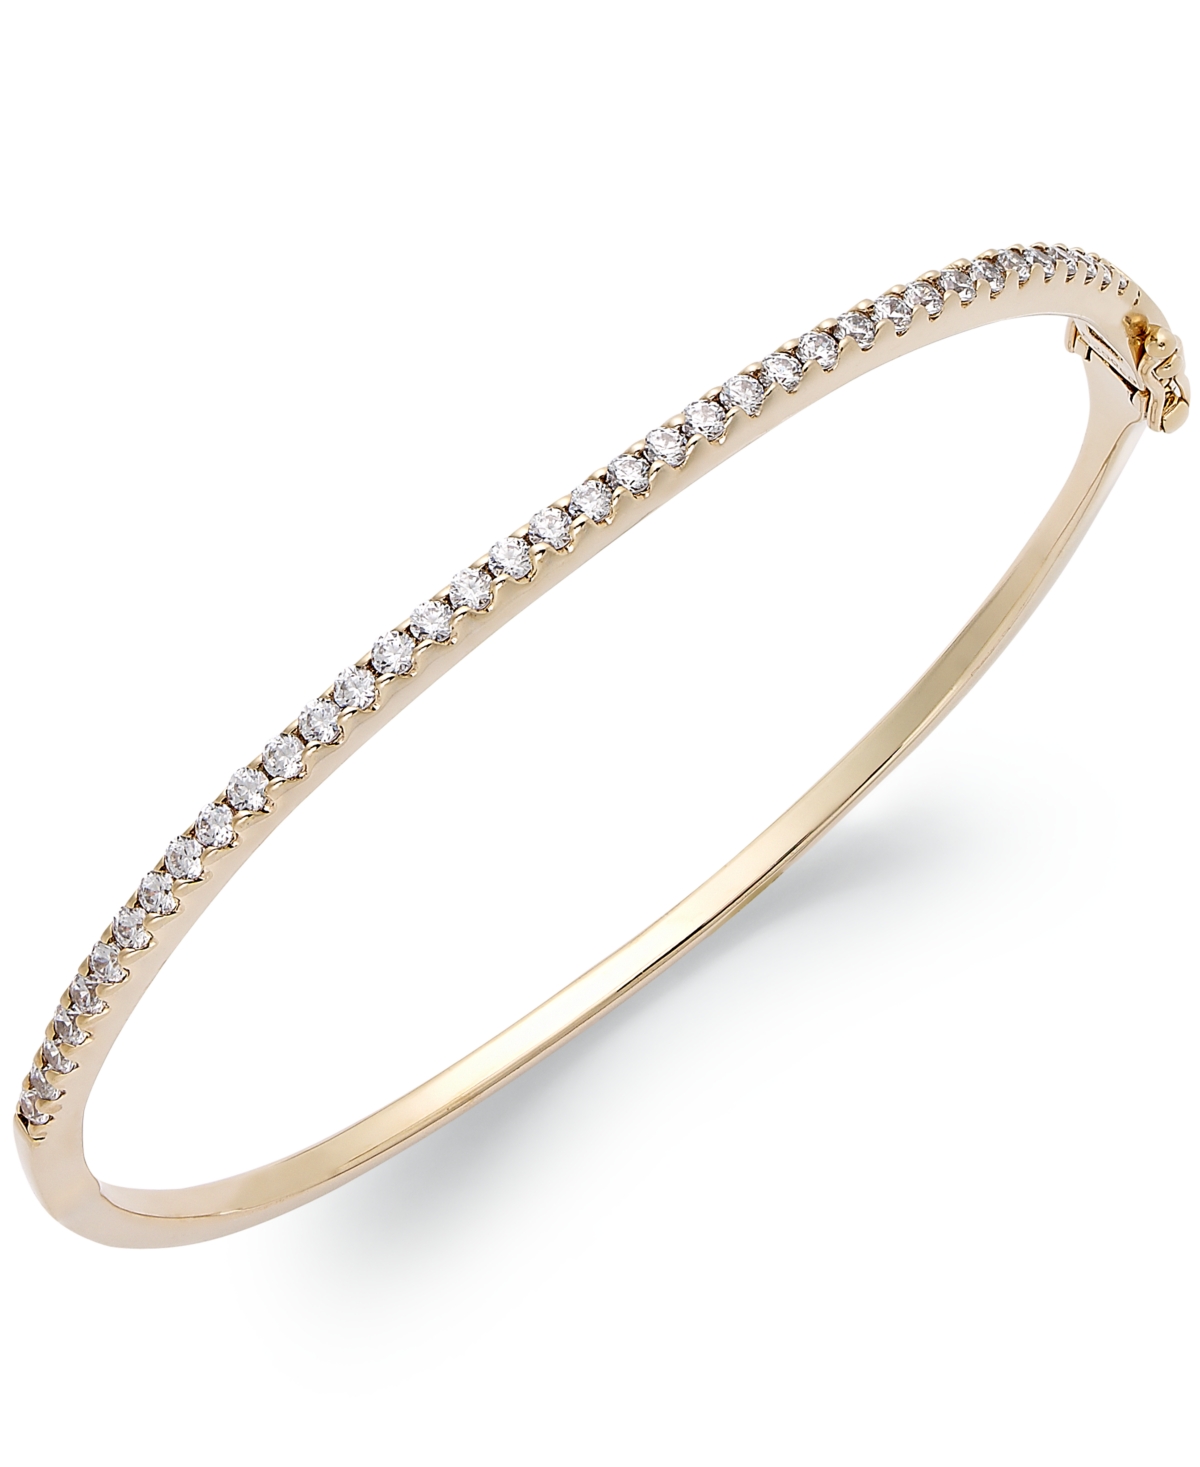 Arabella Sterling Silver Cubic Zirconia Bangle Bracelet (1-3/4 ct. t.w.) (Also available in 14k Gold over Sterling Silver)